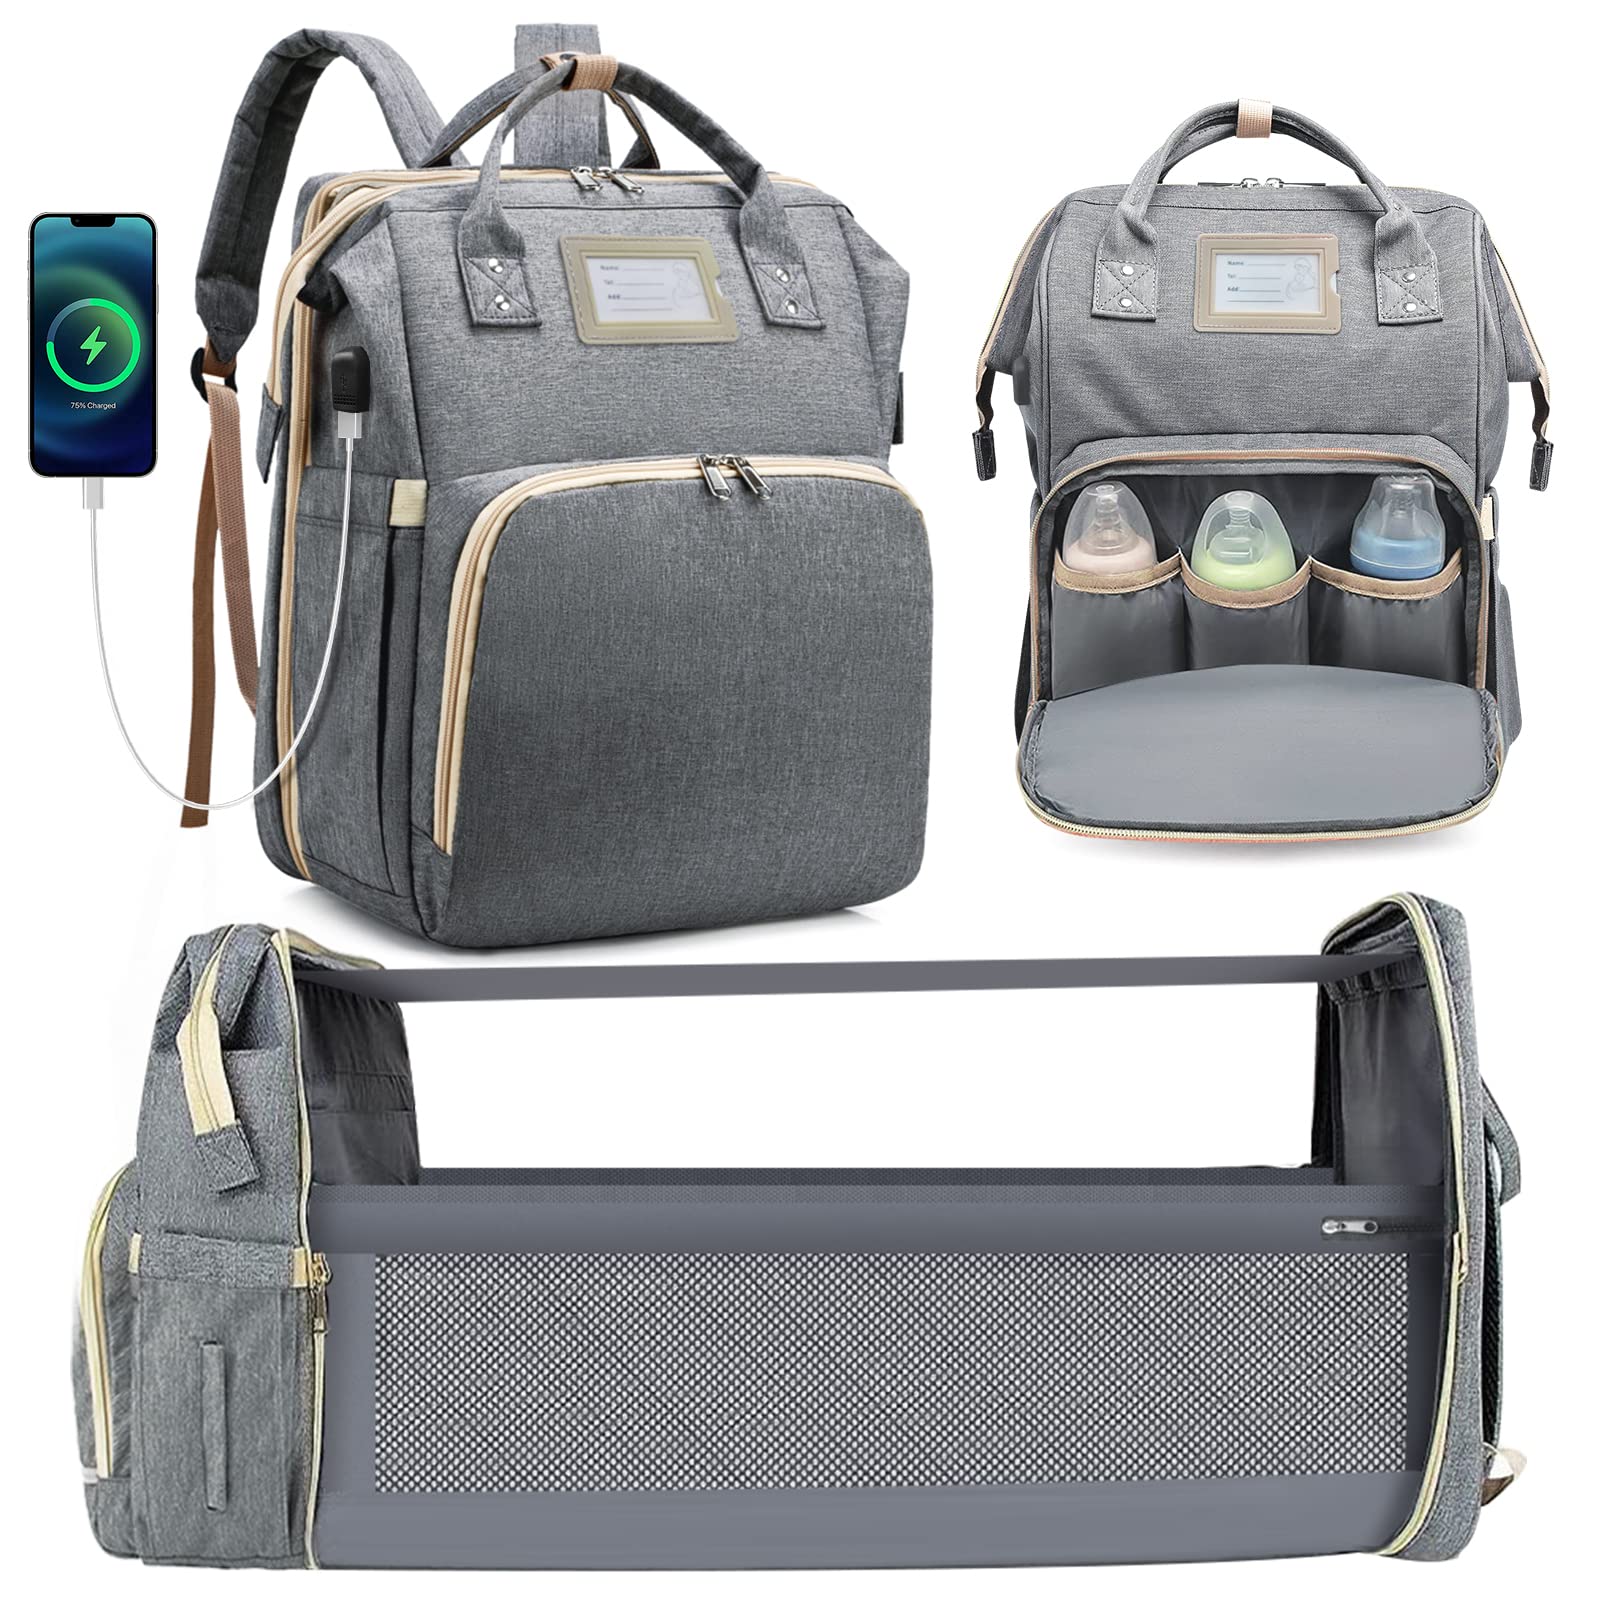 Pomelo Best Versatile Baby Diaper Bag with Tons of Compartments, Built-in Stroller Straps, and Changing Pad, Color GreyGray, by xpwholesale